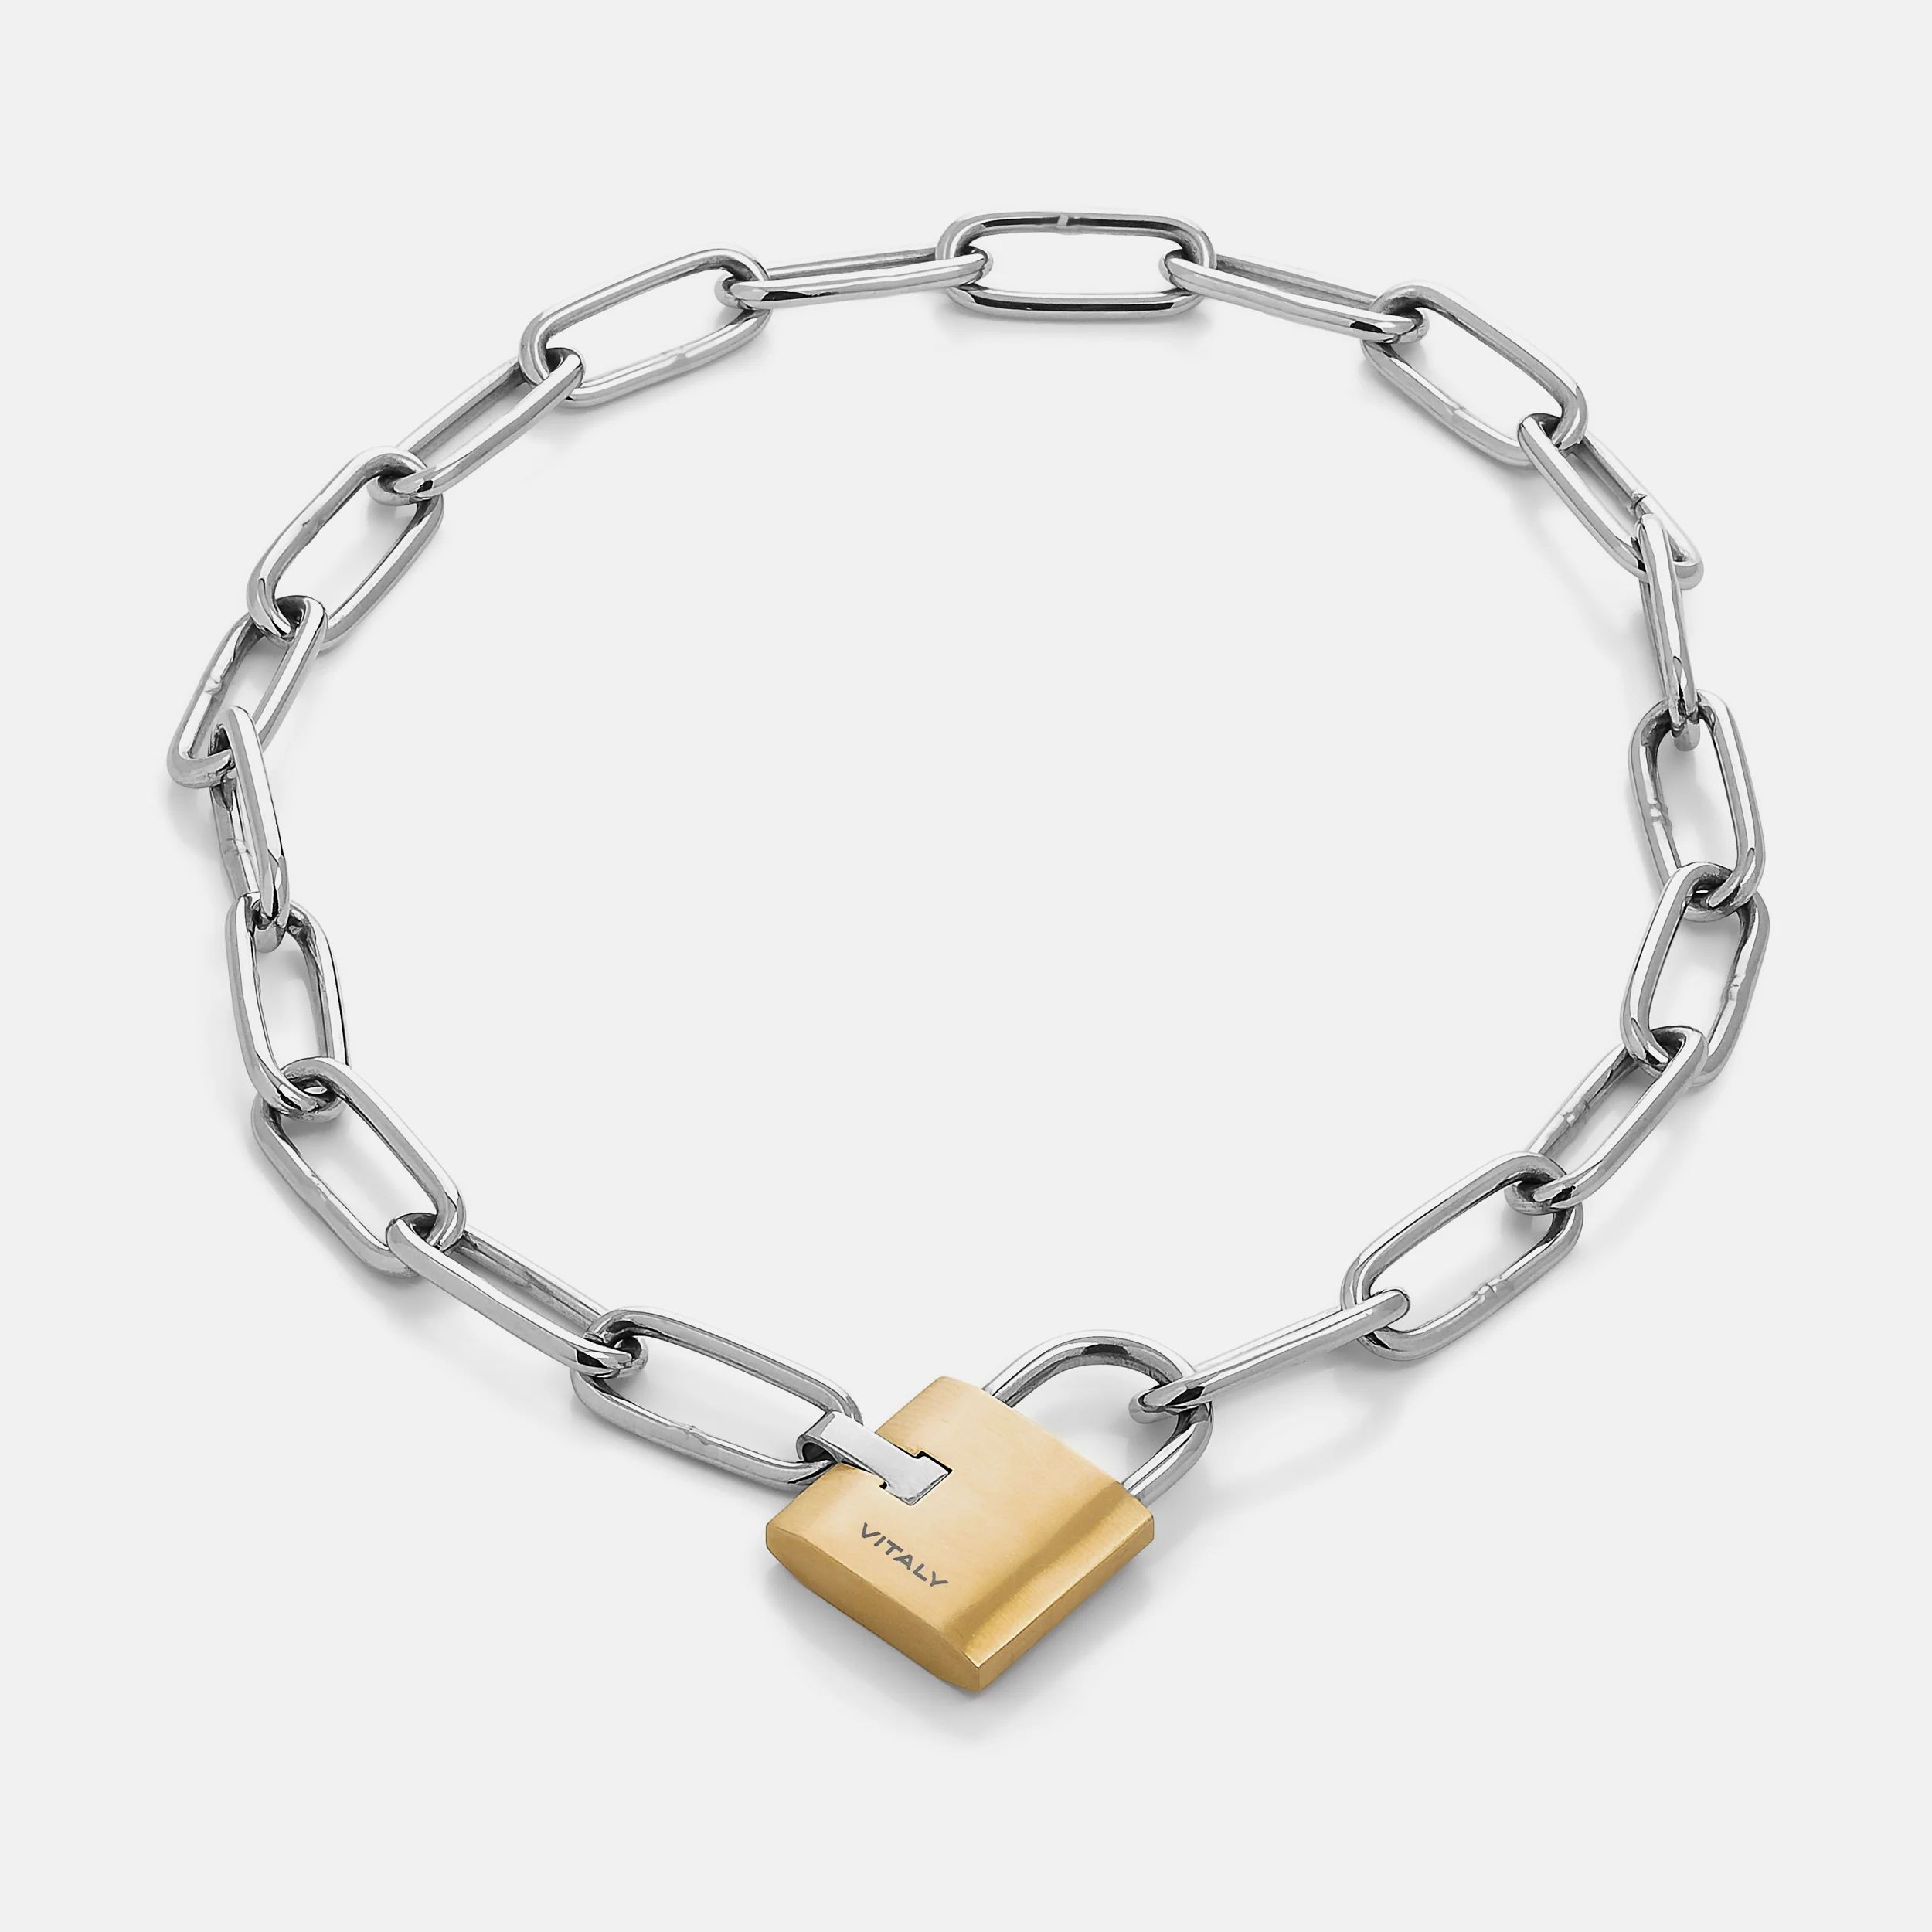 Vitaly Trespass Chain | 100% Recycled Stainless Steel Accessories | Vitaly Design (US)